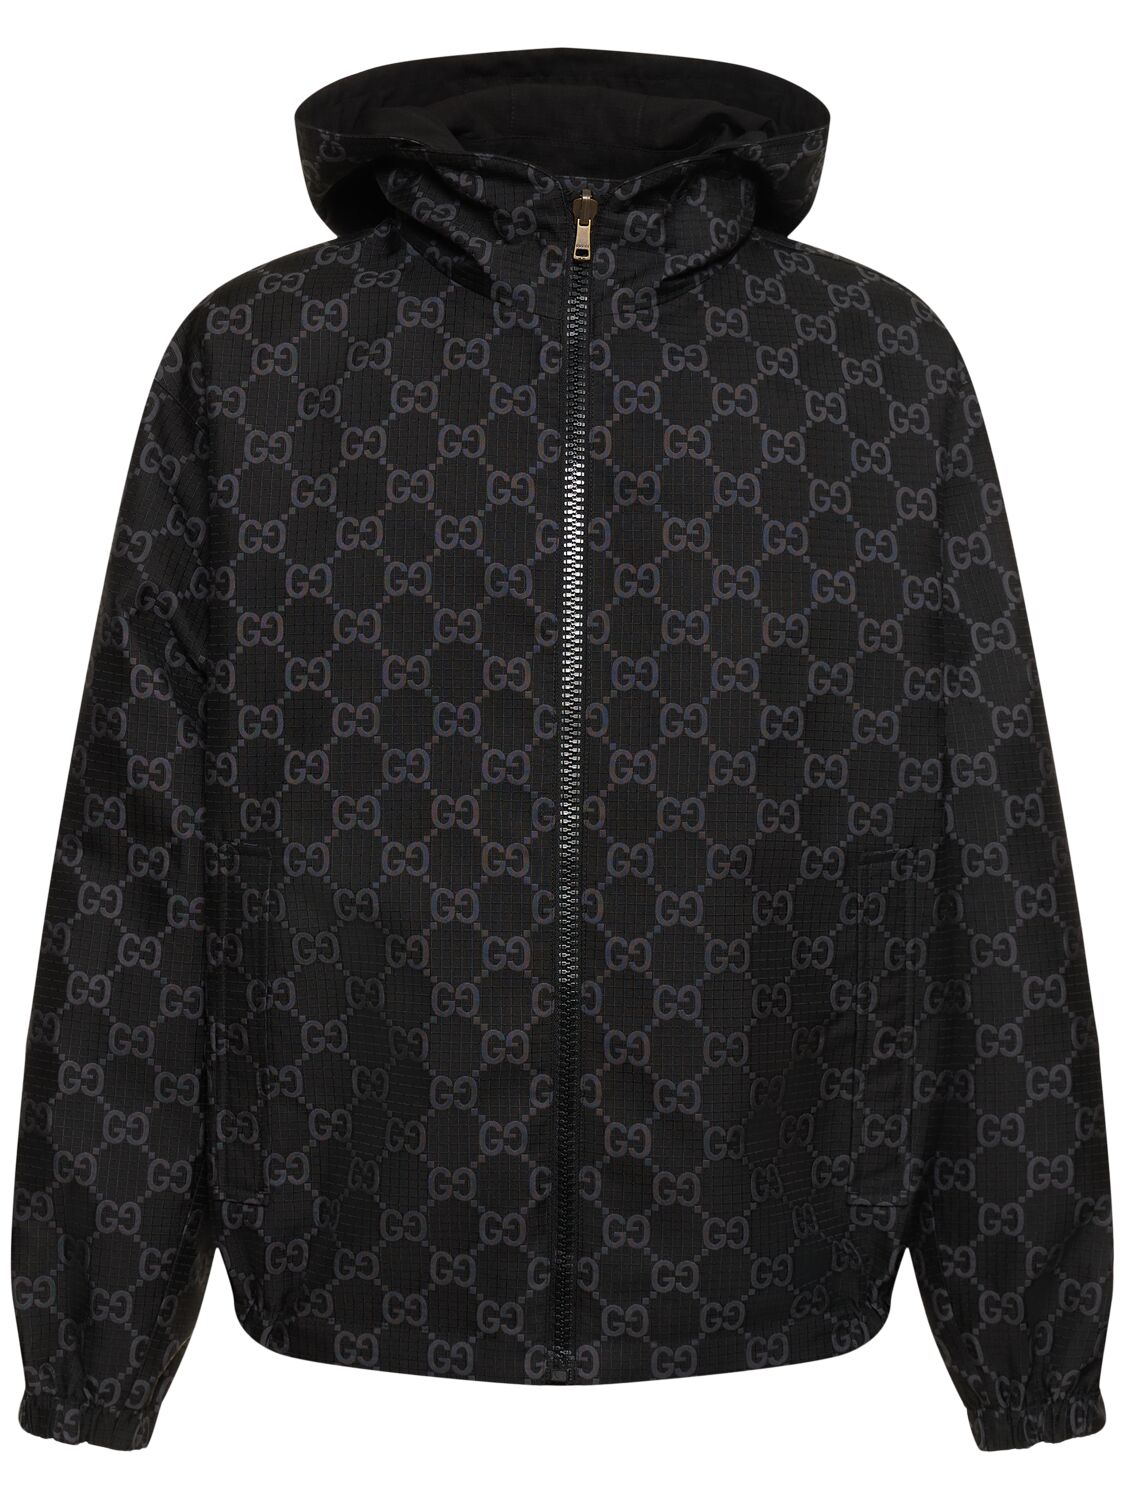 Gucci Gg Ripstop Tech Jacket In Black